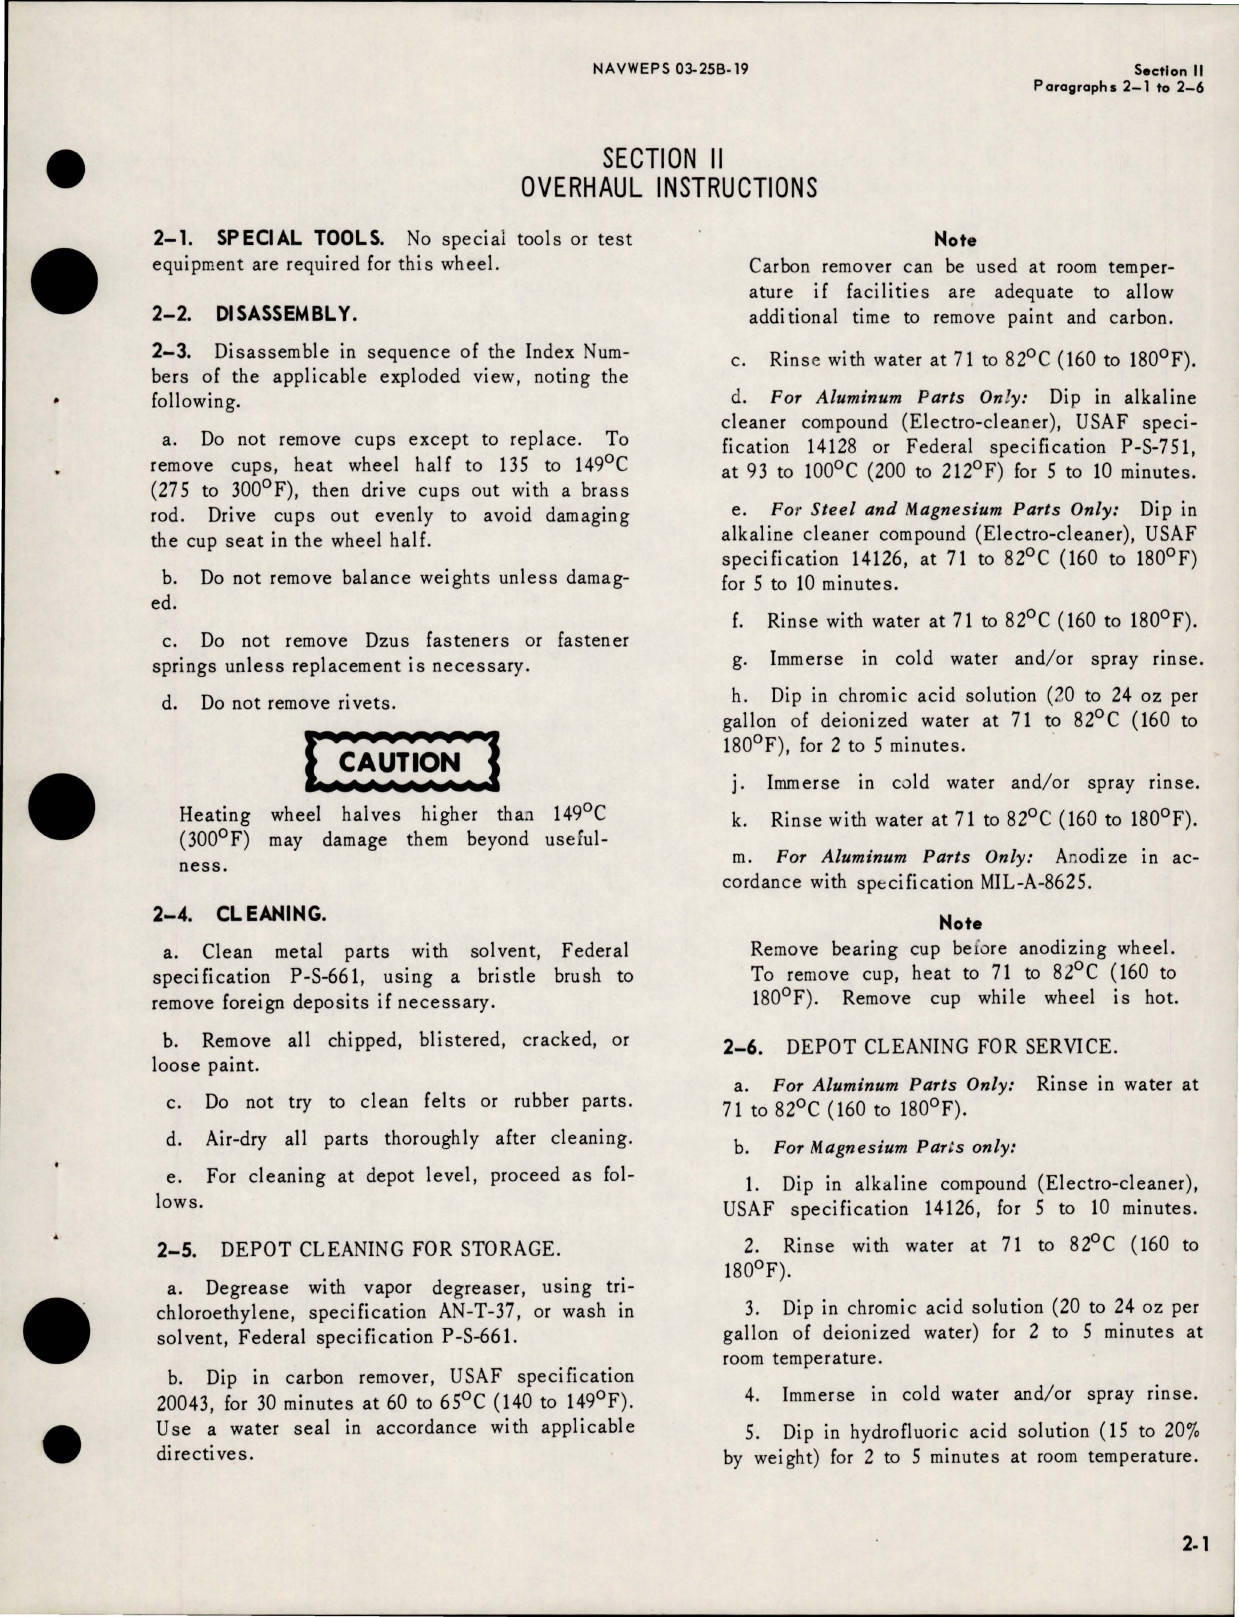 Sample page 7 from AirCorps Library document: Overhaul Instructions for Main Landing Gear Wheels 